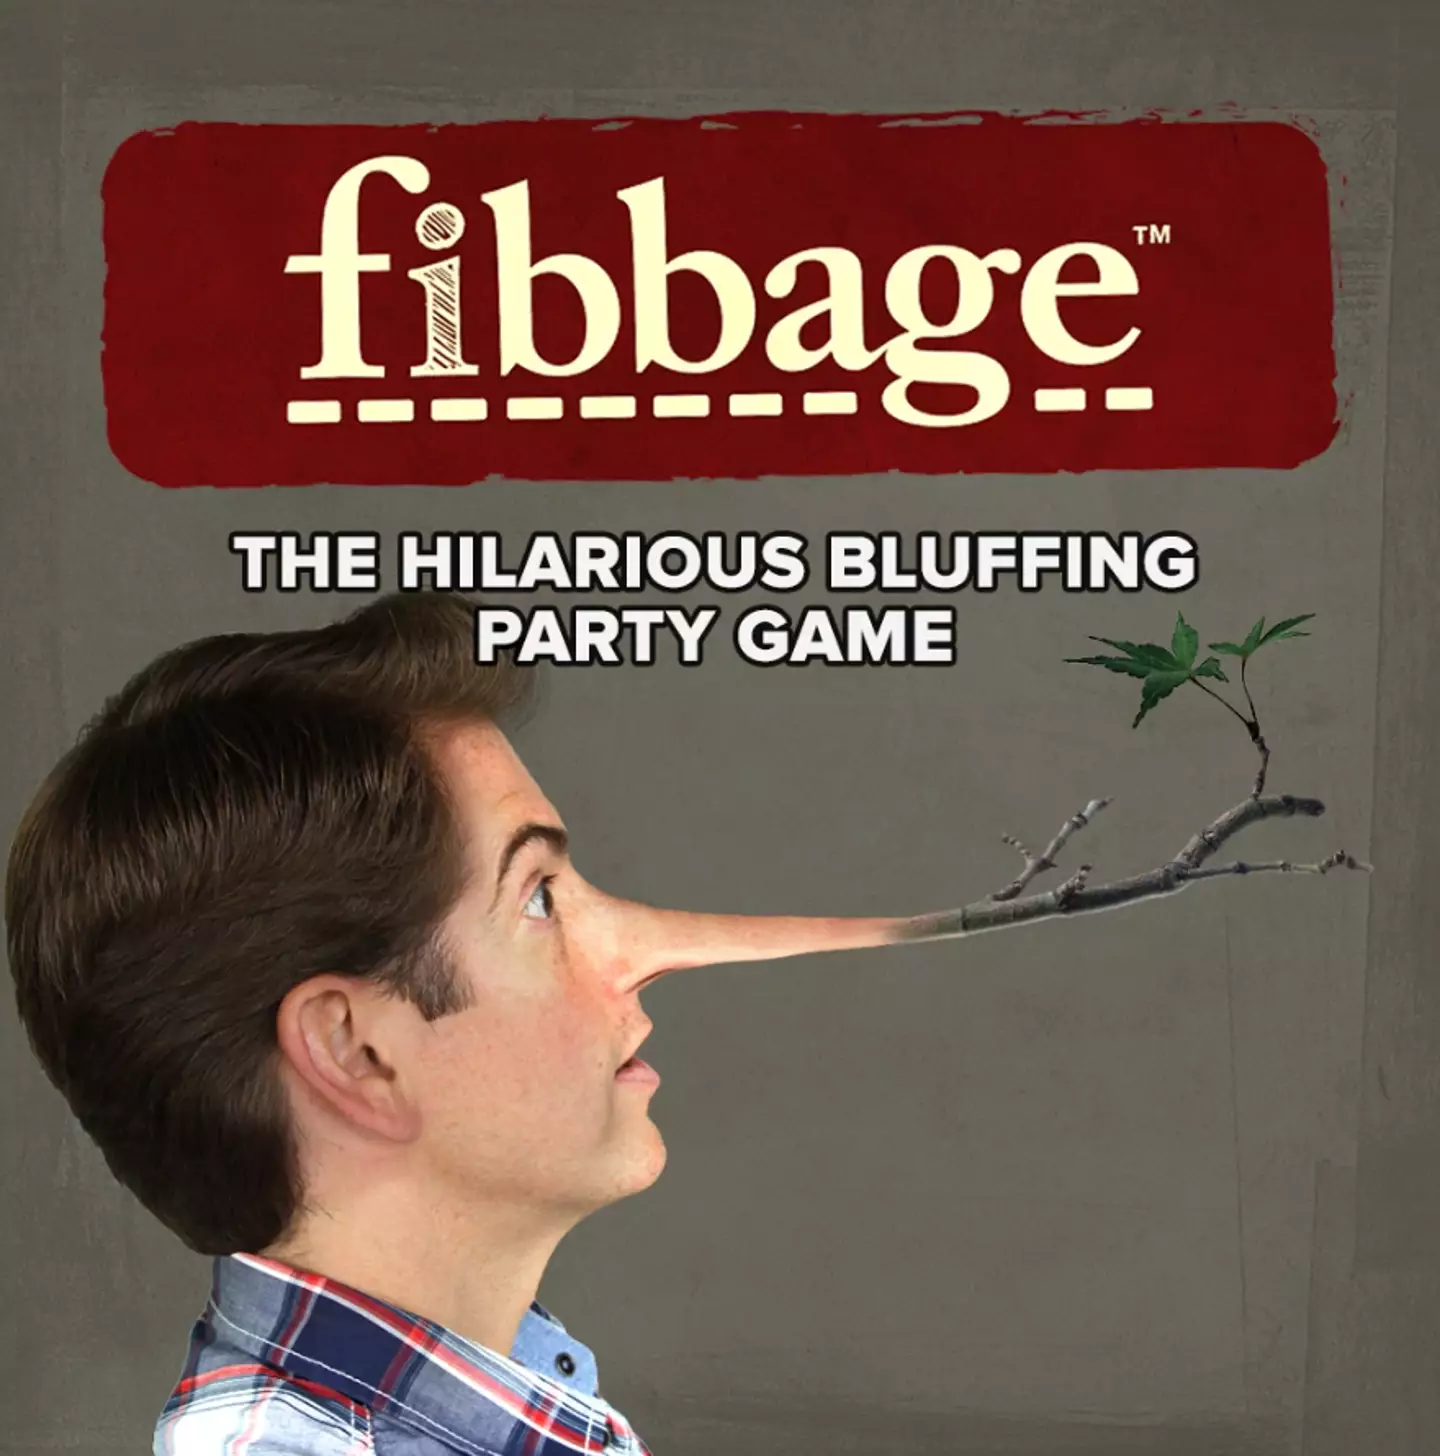 Jackbox's Fibbage is all the range right now.